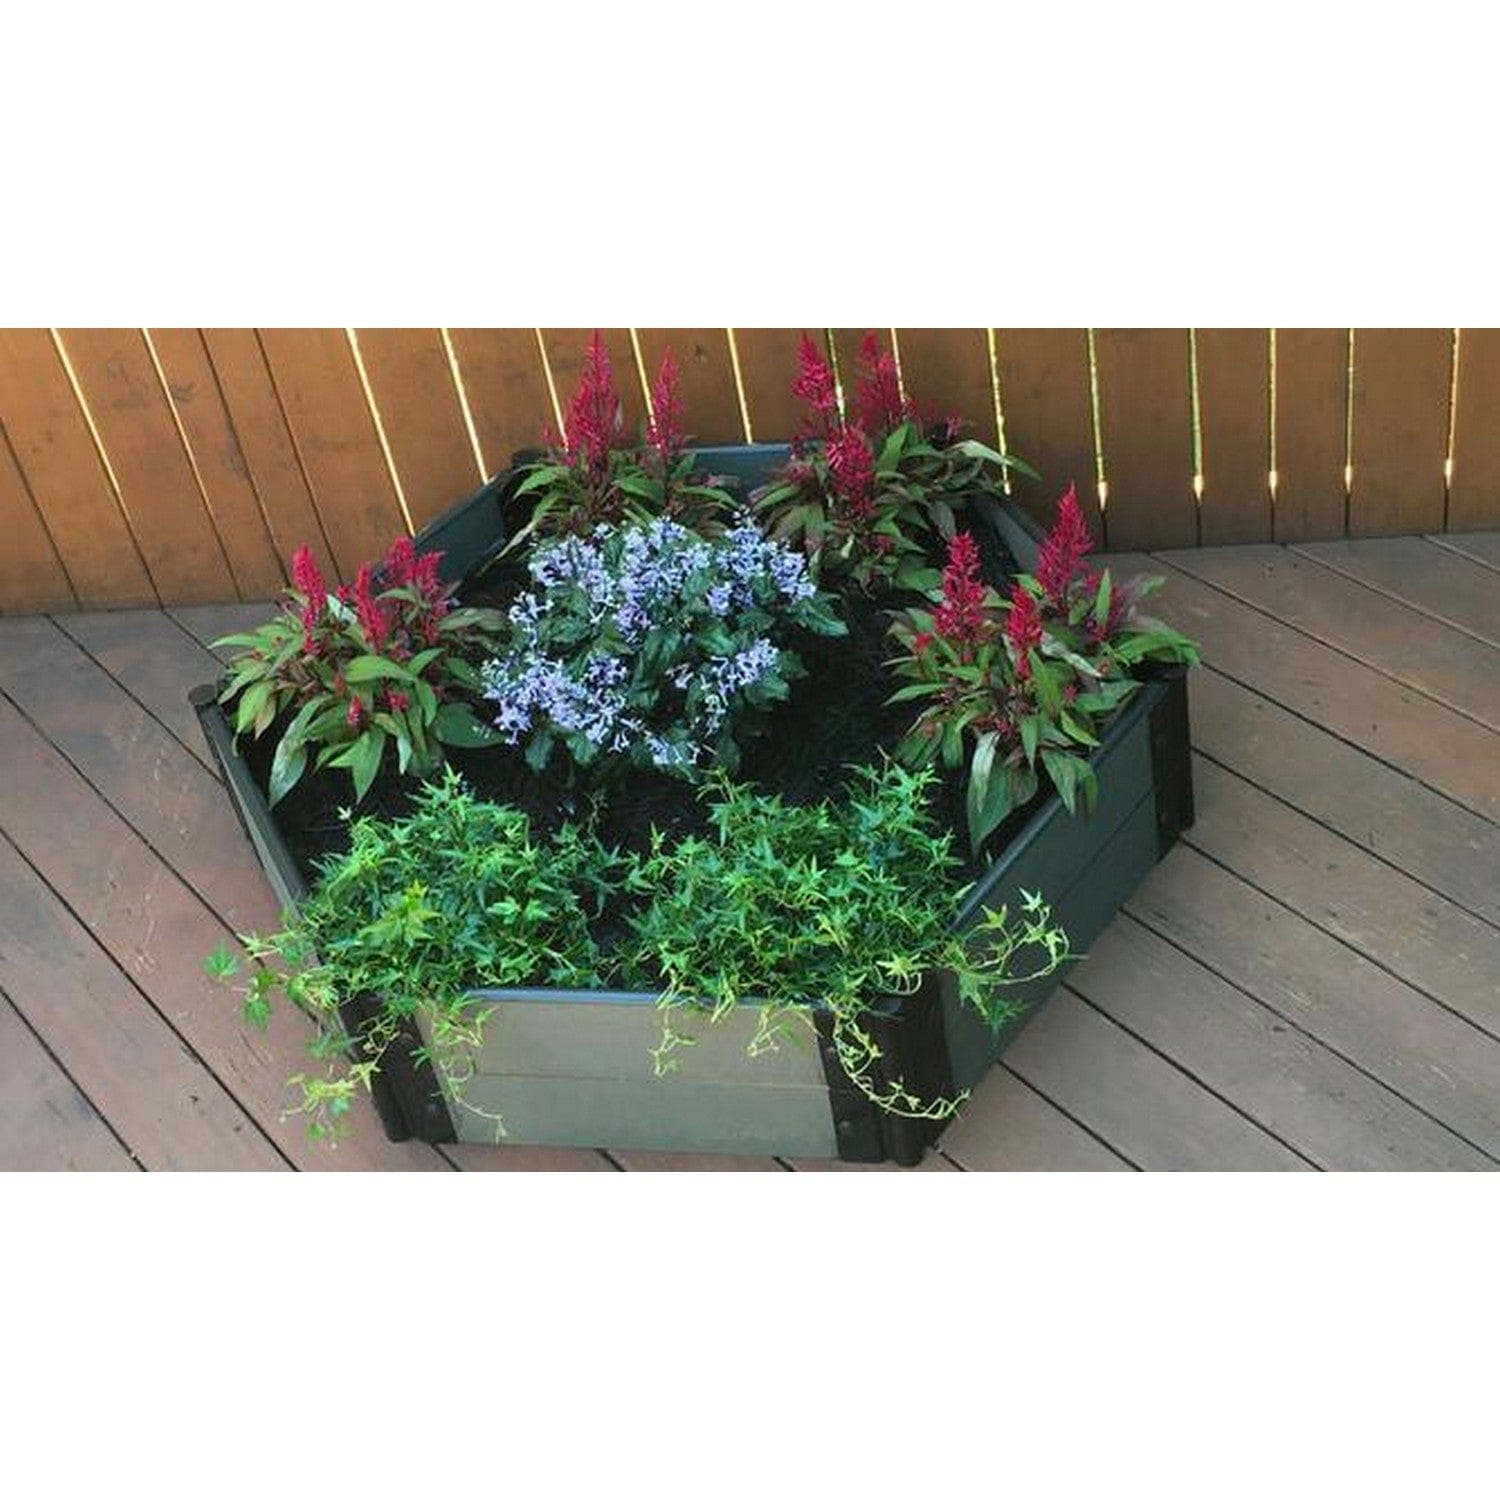 Frame It All Gardening Accessories Frame It All | Tool-Free Fort Jefferson Raised Garden Bed (Hexagon) 4' X 4' X 5.5" - Uptown Brown - 1" Profile 200001469